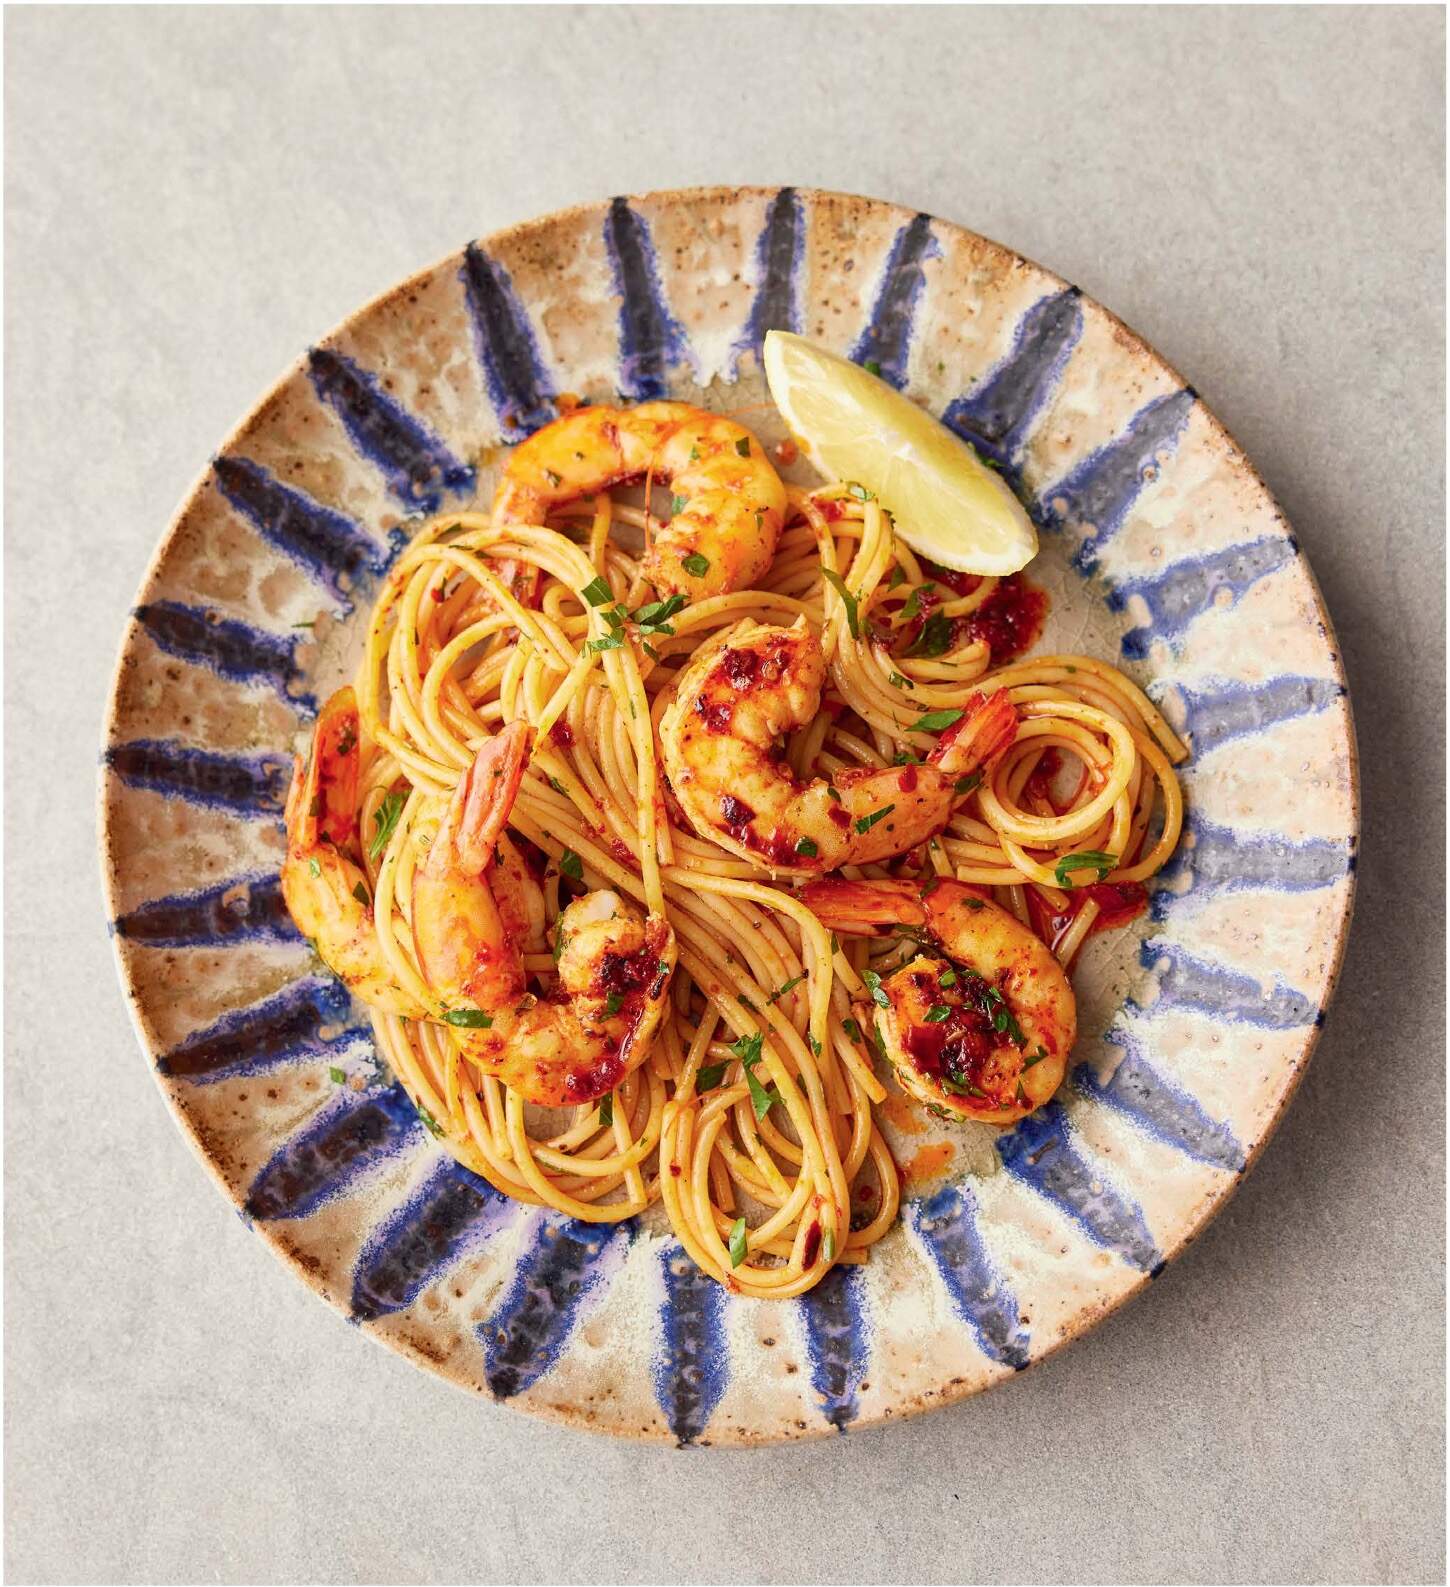 In Jamie Oliver's newest cookbook, you don't need many ingredients